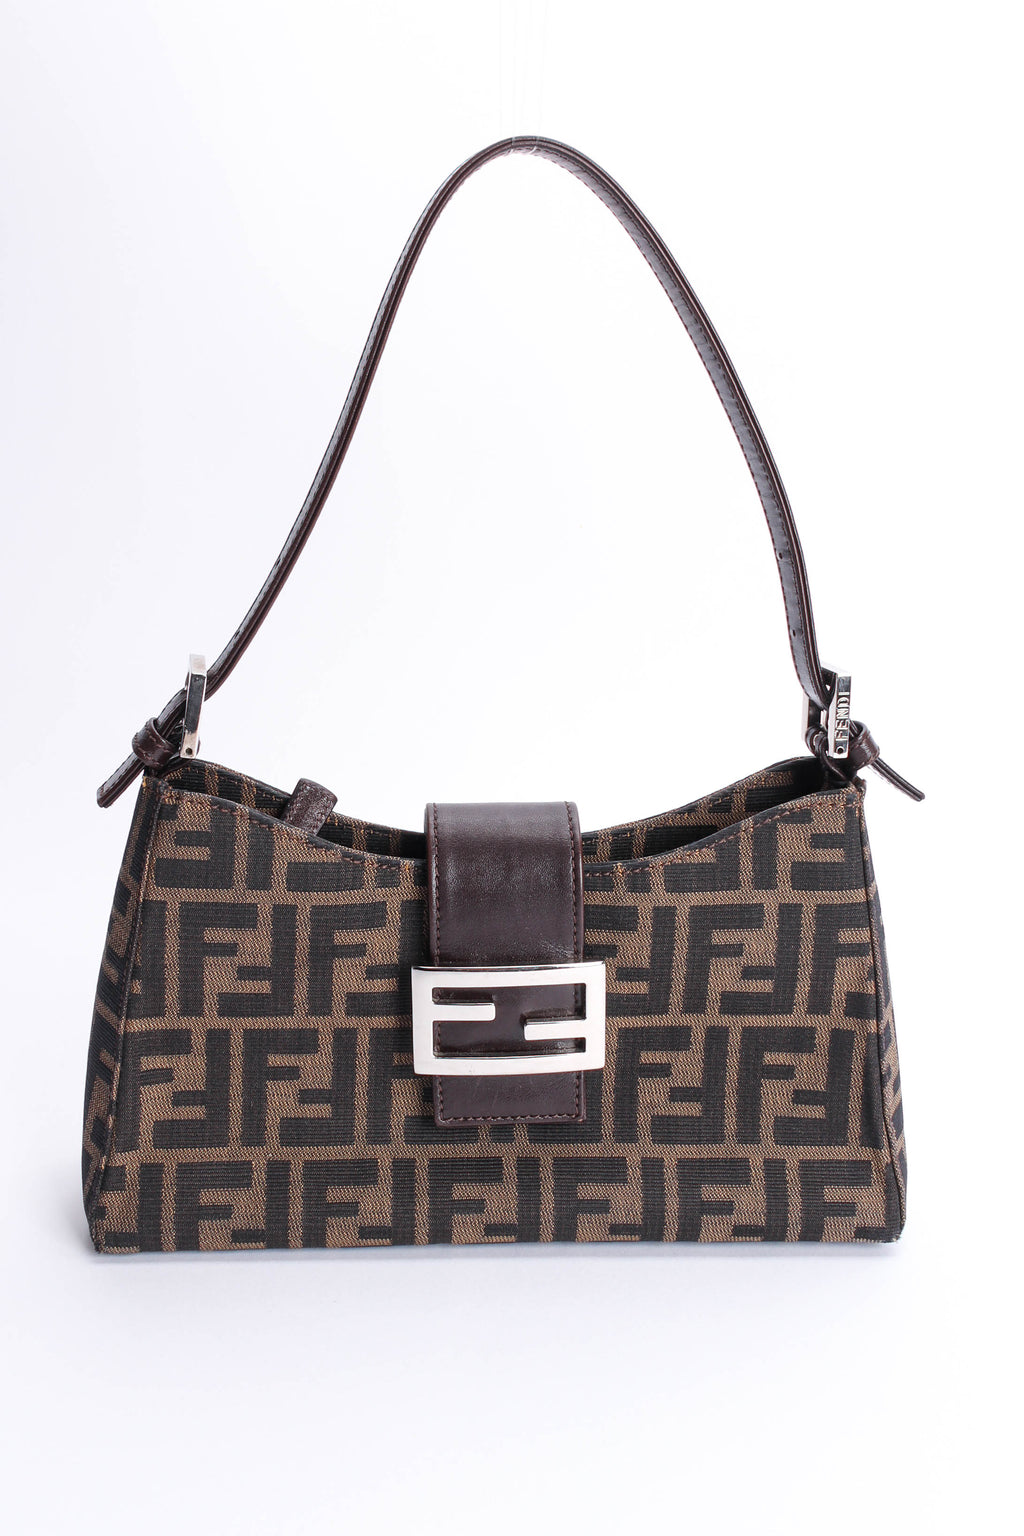 Fendi Vintage Zucca Leather Speedy Handbag Shoulder Bag. Get one of the  hottest styles of the season! Th…